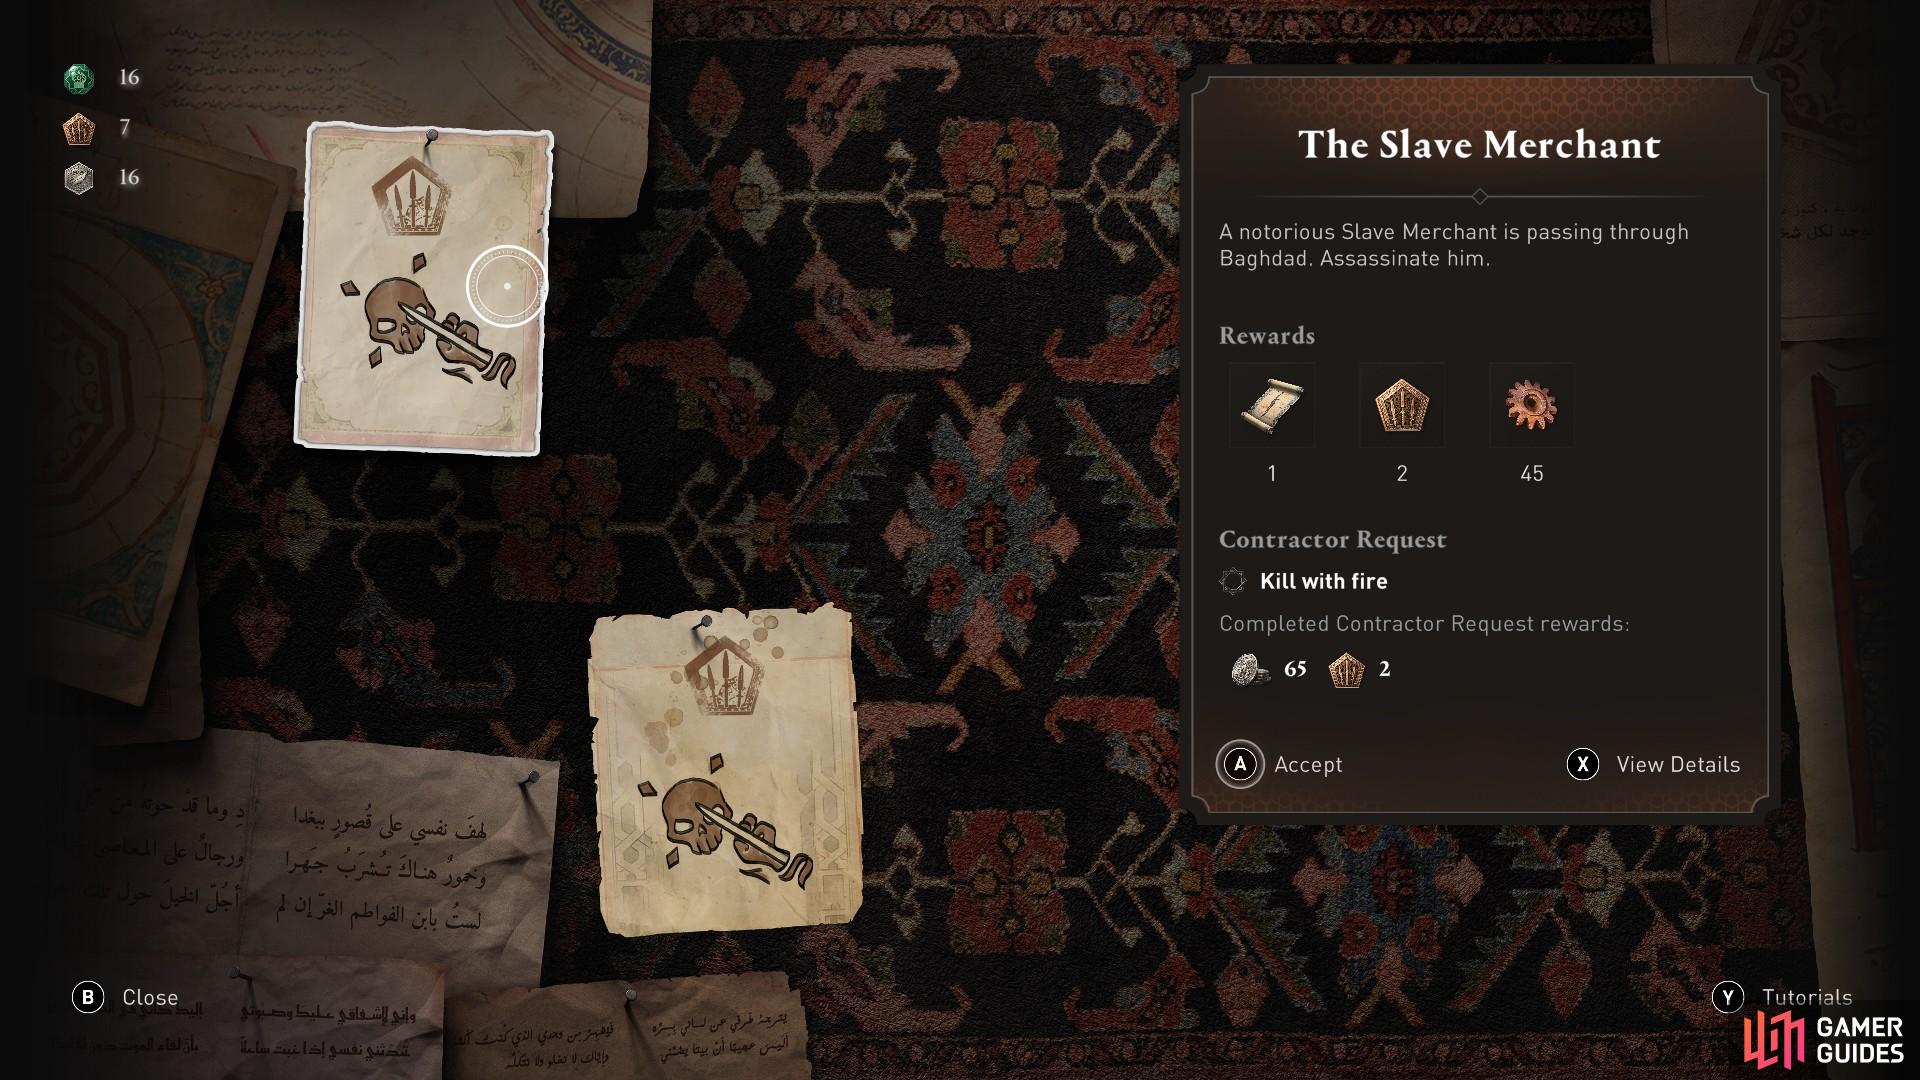 The Slave Merchant will appear after you complete The Weapon Dealer and progress the main story.